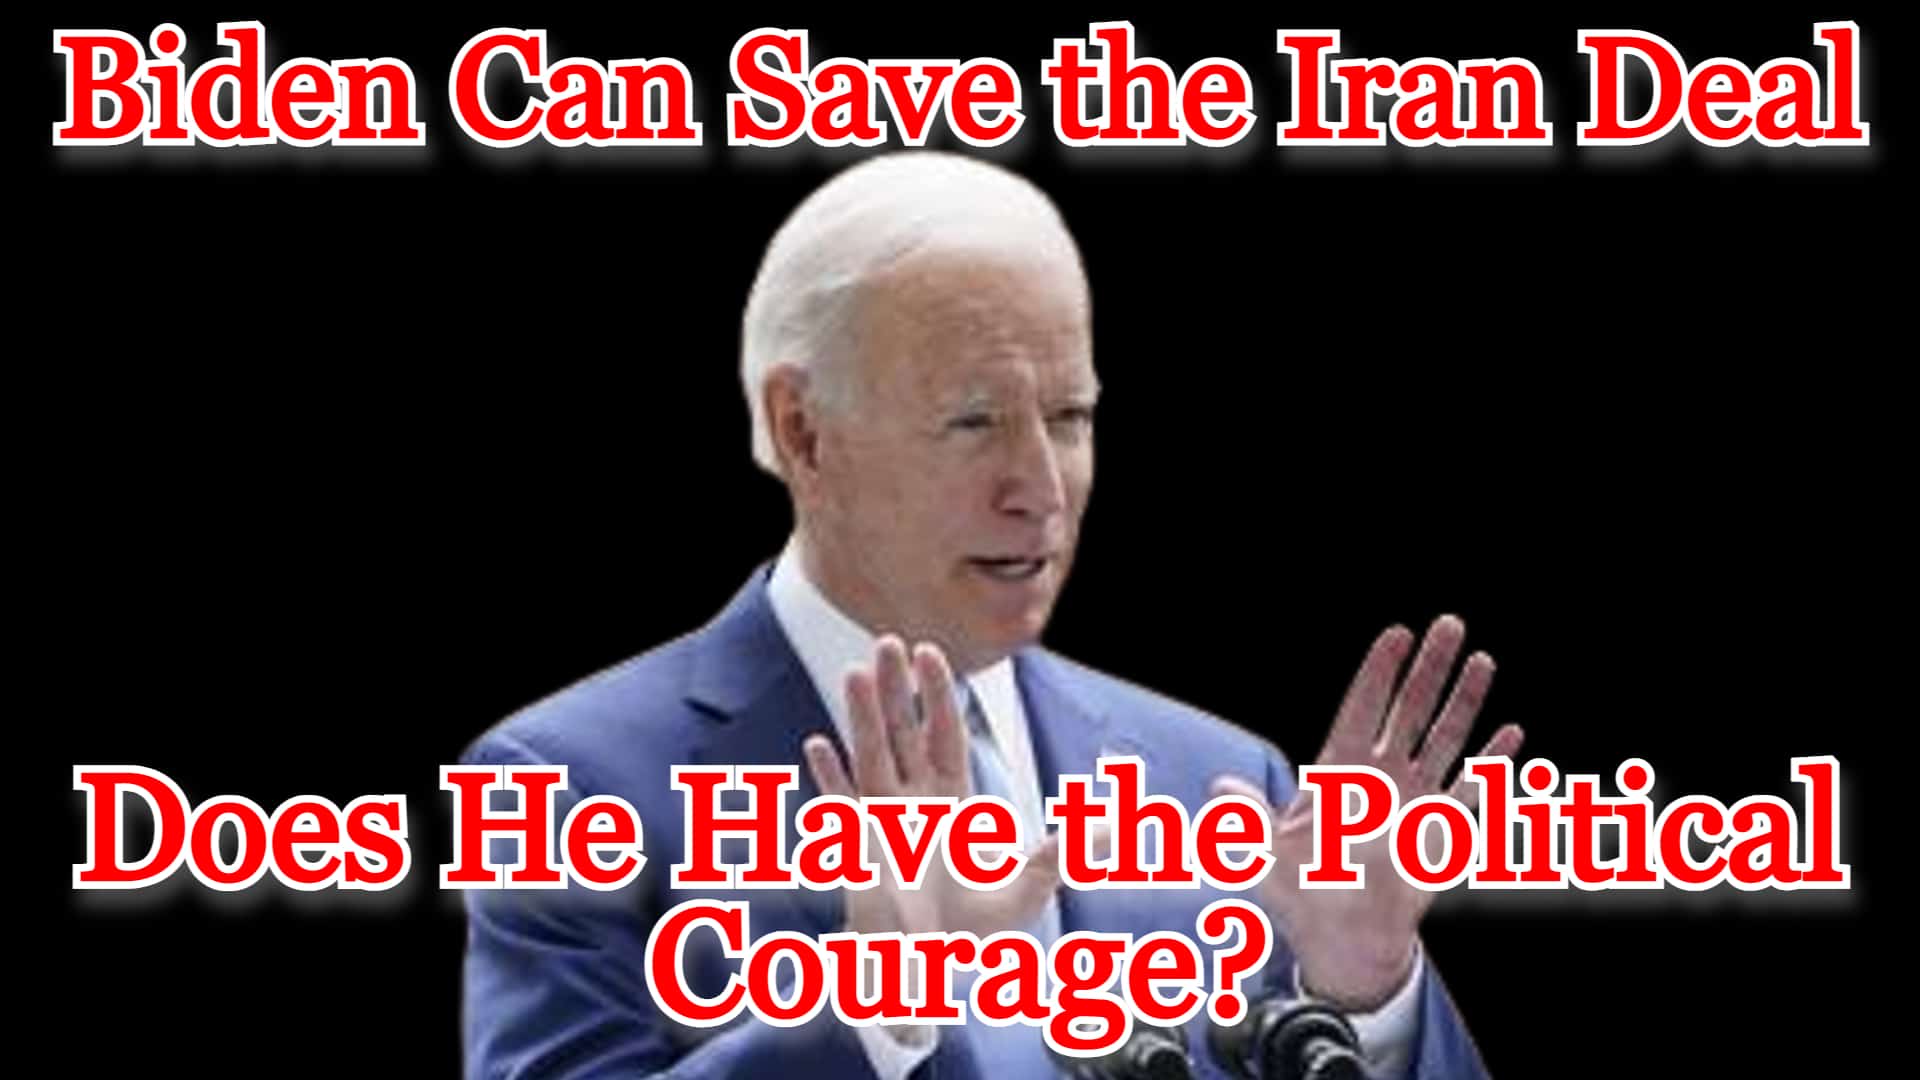 COI #262: Biden Can Save the Iran Deal, Does He Have the Political Courage?